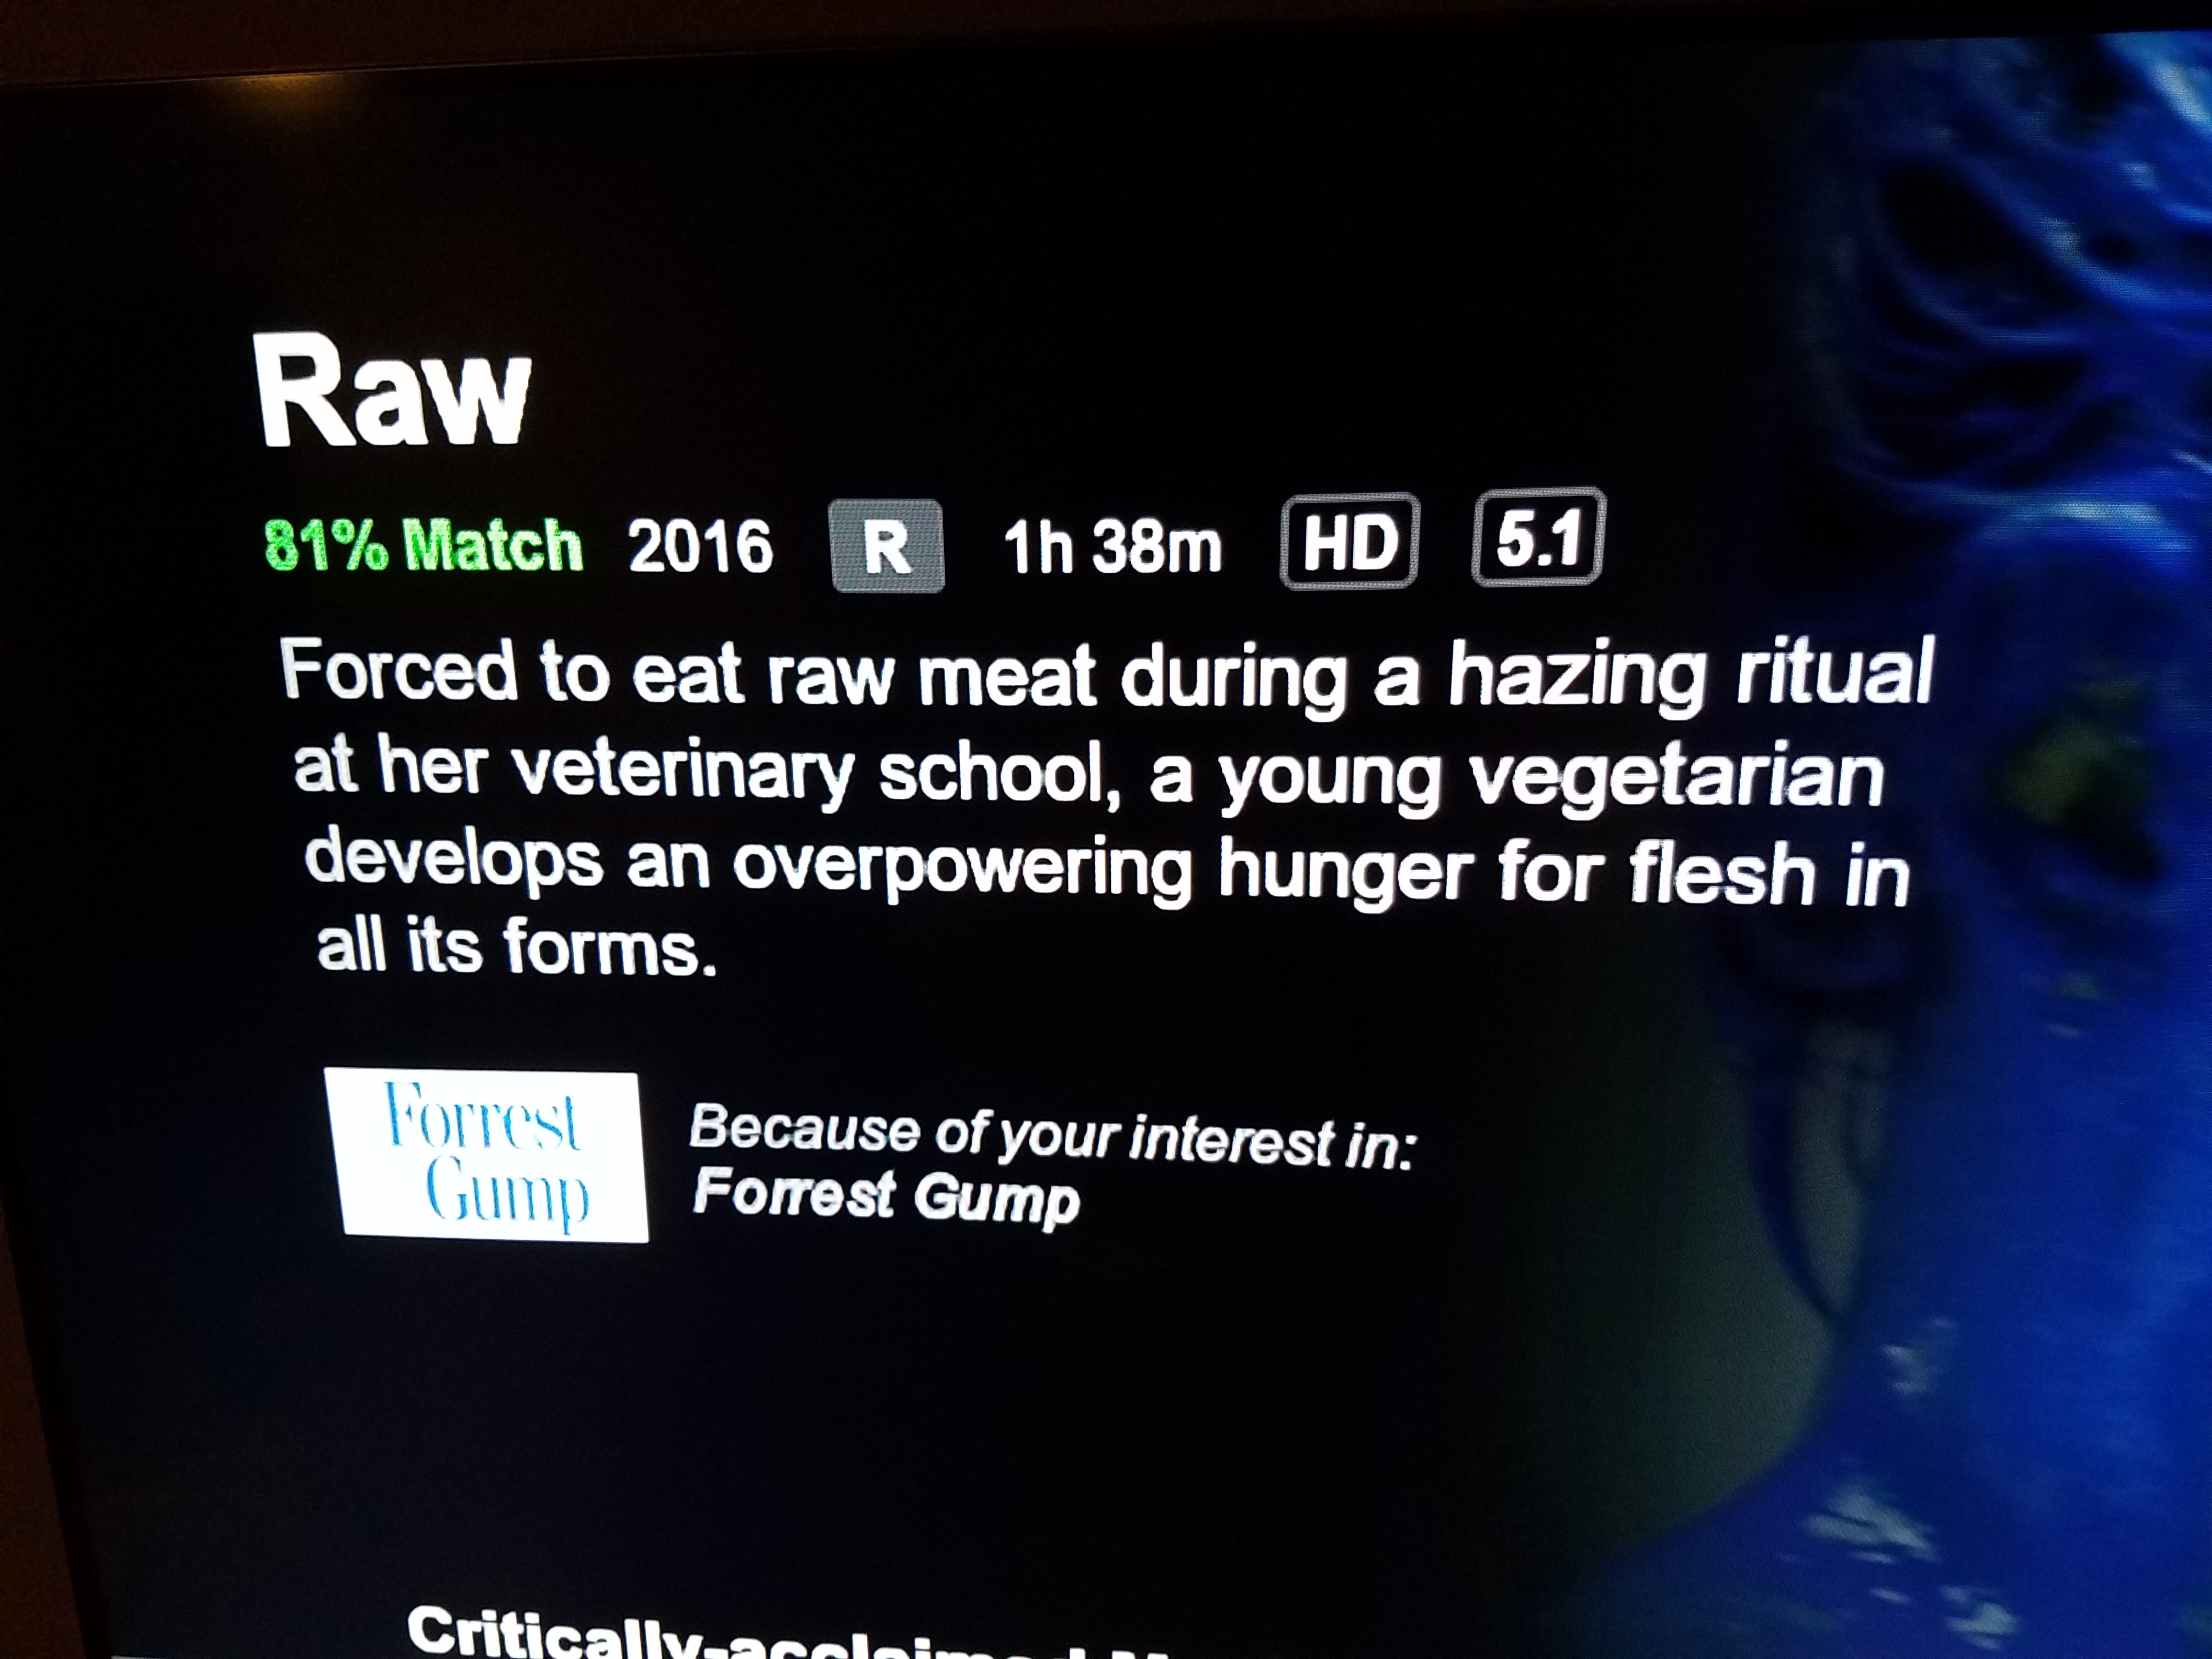 multimedia - Raw 81% Match 2016 R 1h 38m Hd 5.1 Forced to eat raw meat during a hazing ritual at her veterinary school, a young vegetarian develops an overpowering hunger for flesh in all its forms. Fotos Because of your interest in Forrest Gump Criticall